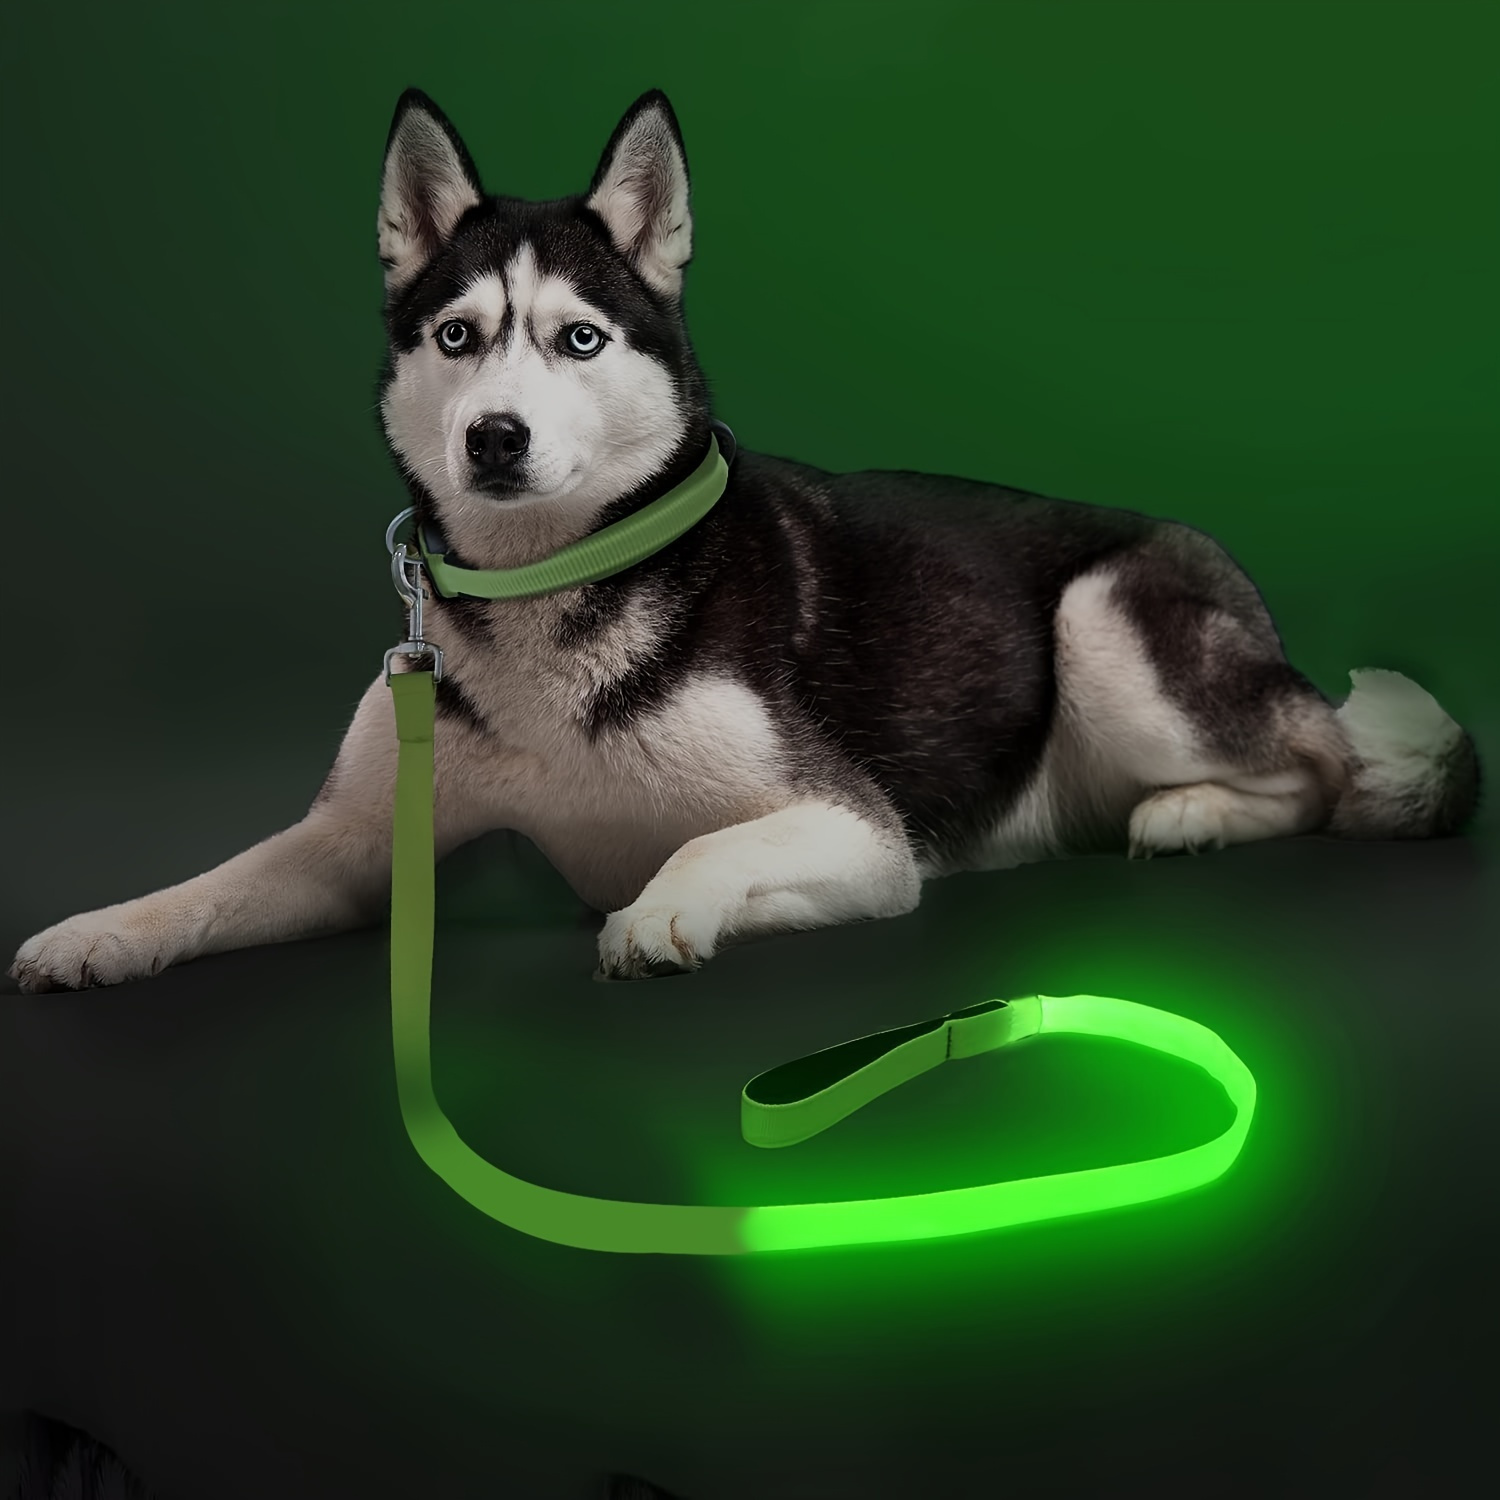 

Light Up The Night With A Led Dog Leash - Keep Your Dog Safe & Visible On Walks!